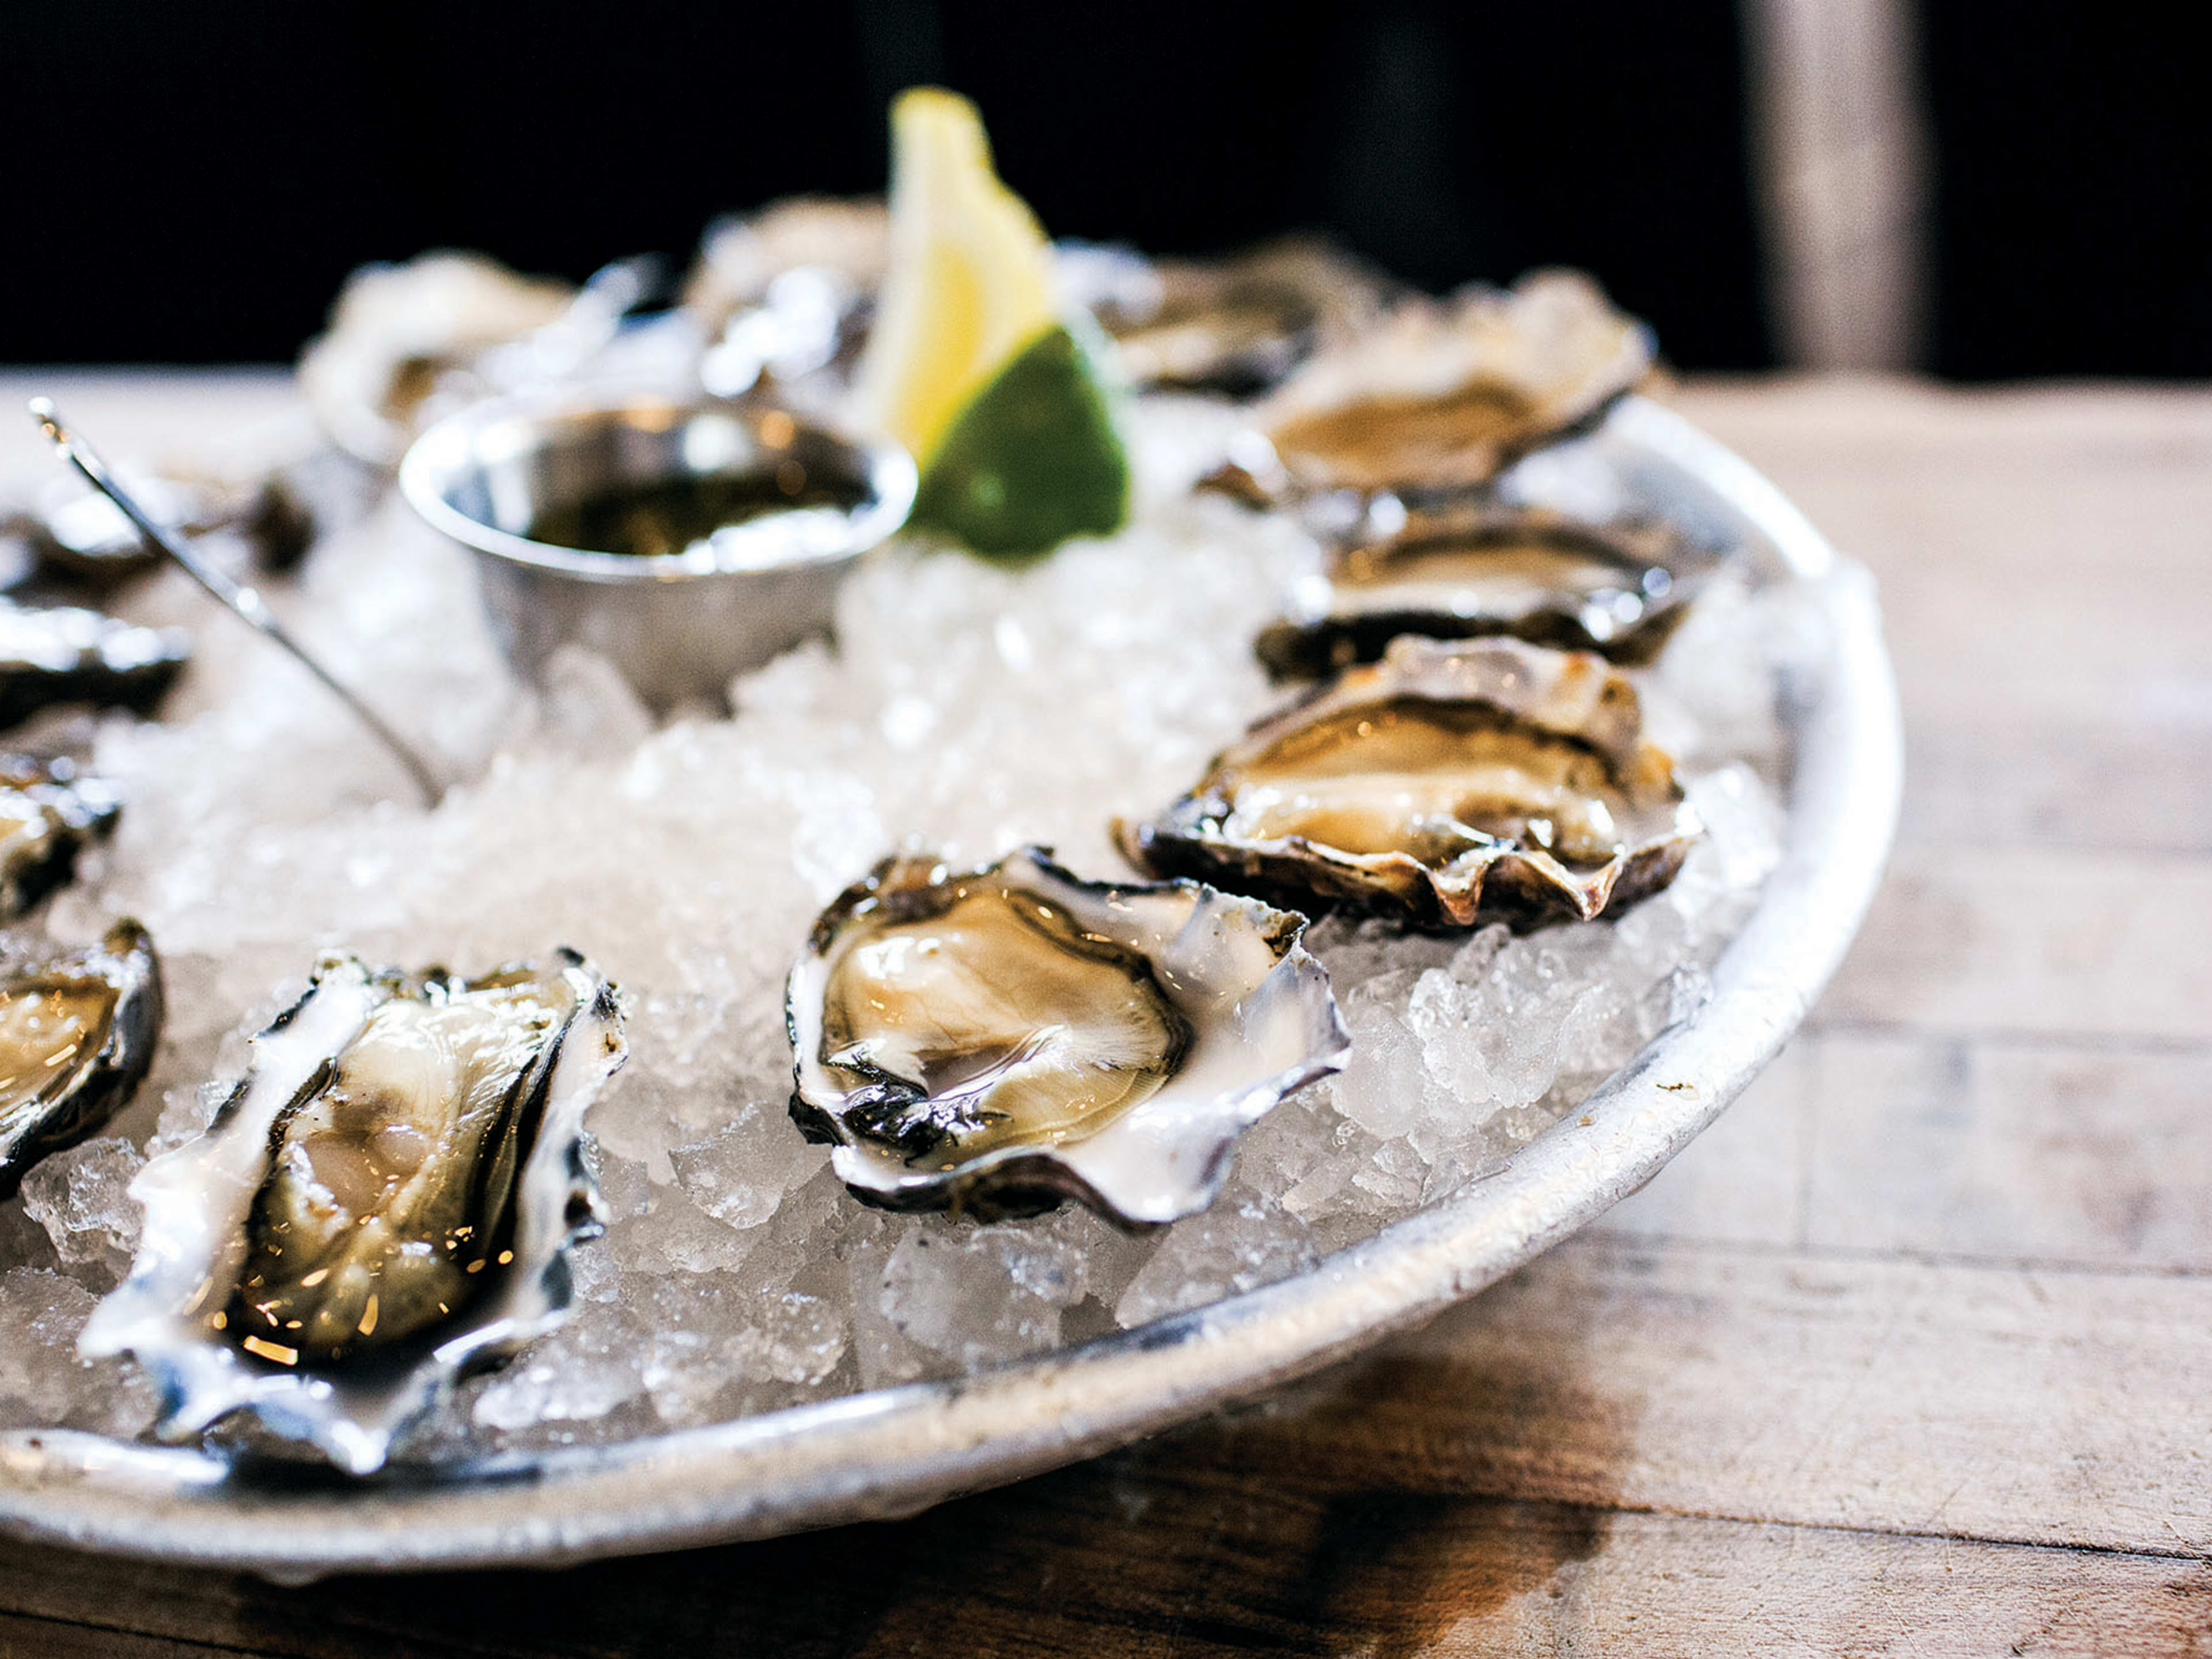 A tray of cold oysters from Hog Island Oyster Co.